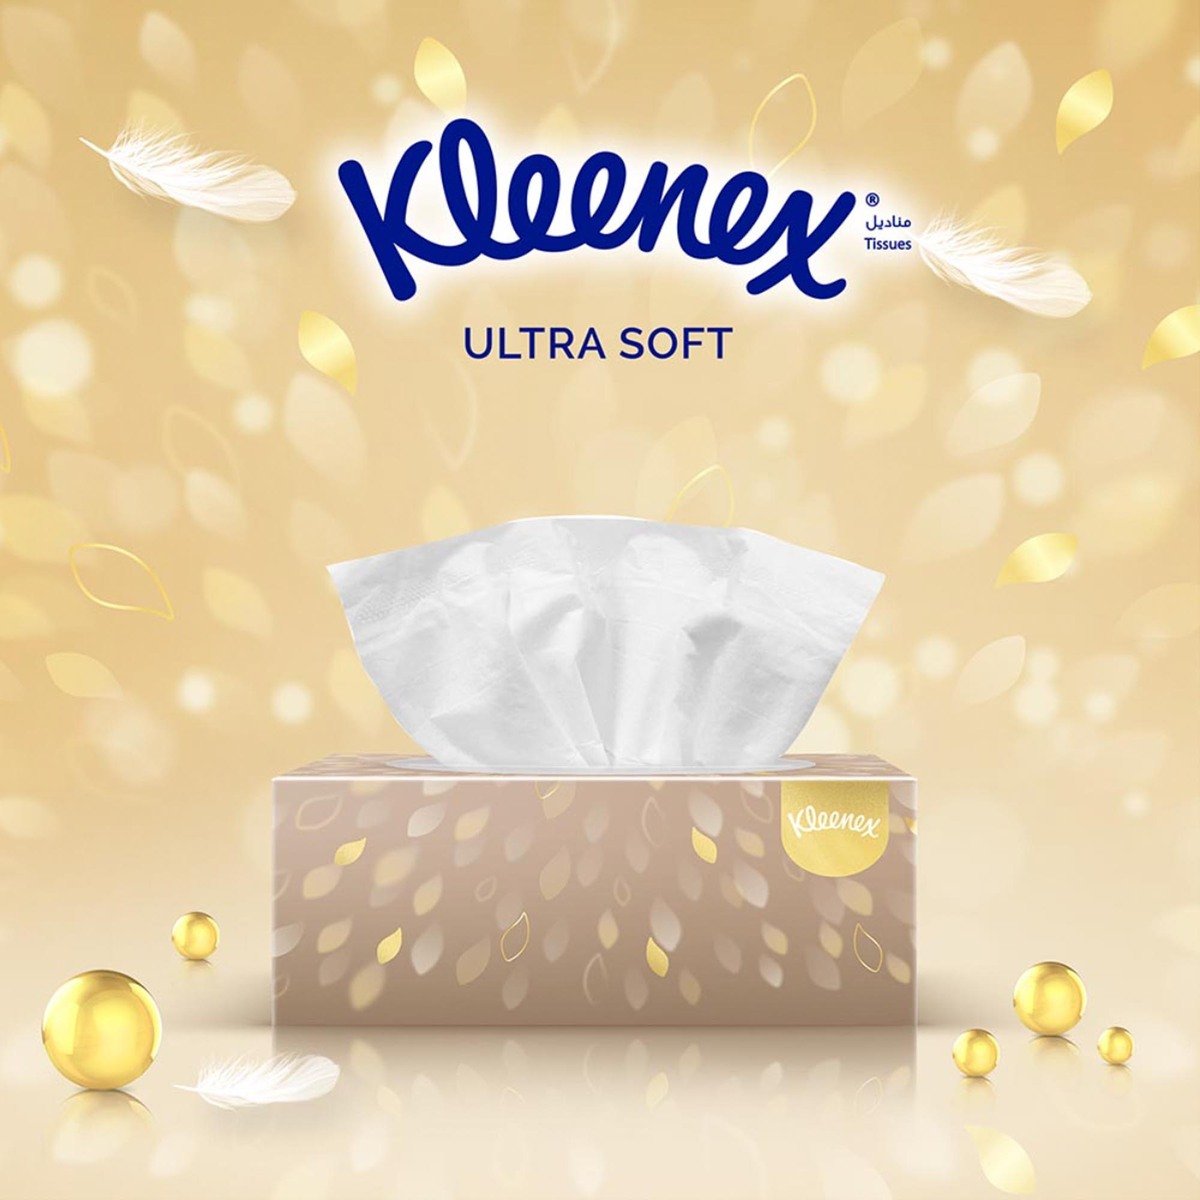 Kleenex Ultra Soft Gentle Care Facial Tissue 3ply 5 x 96 Sheets